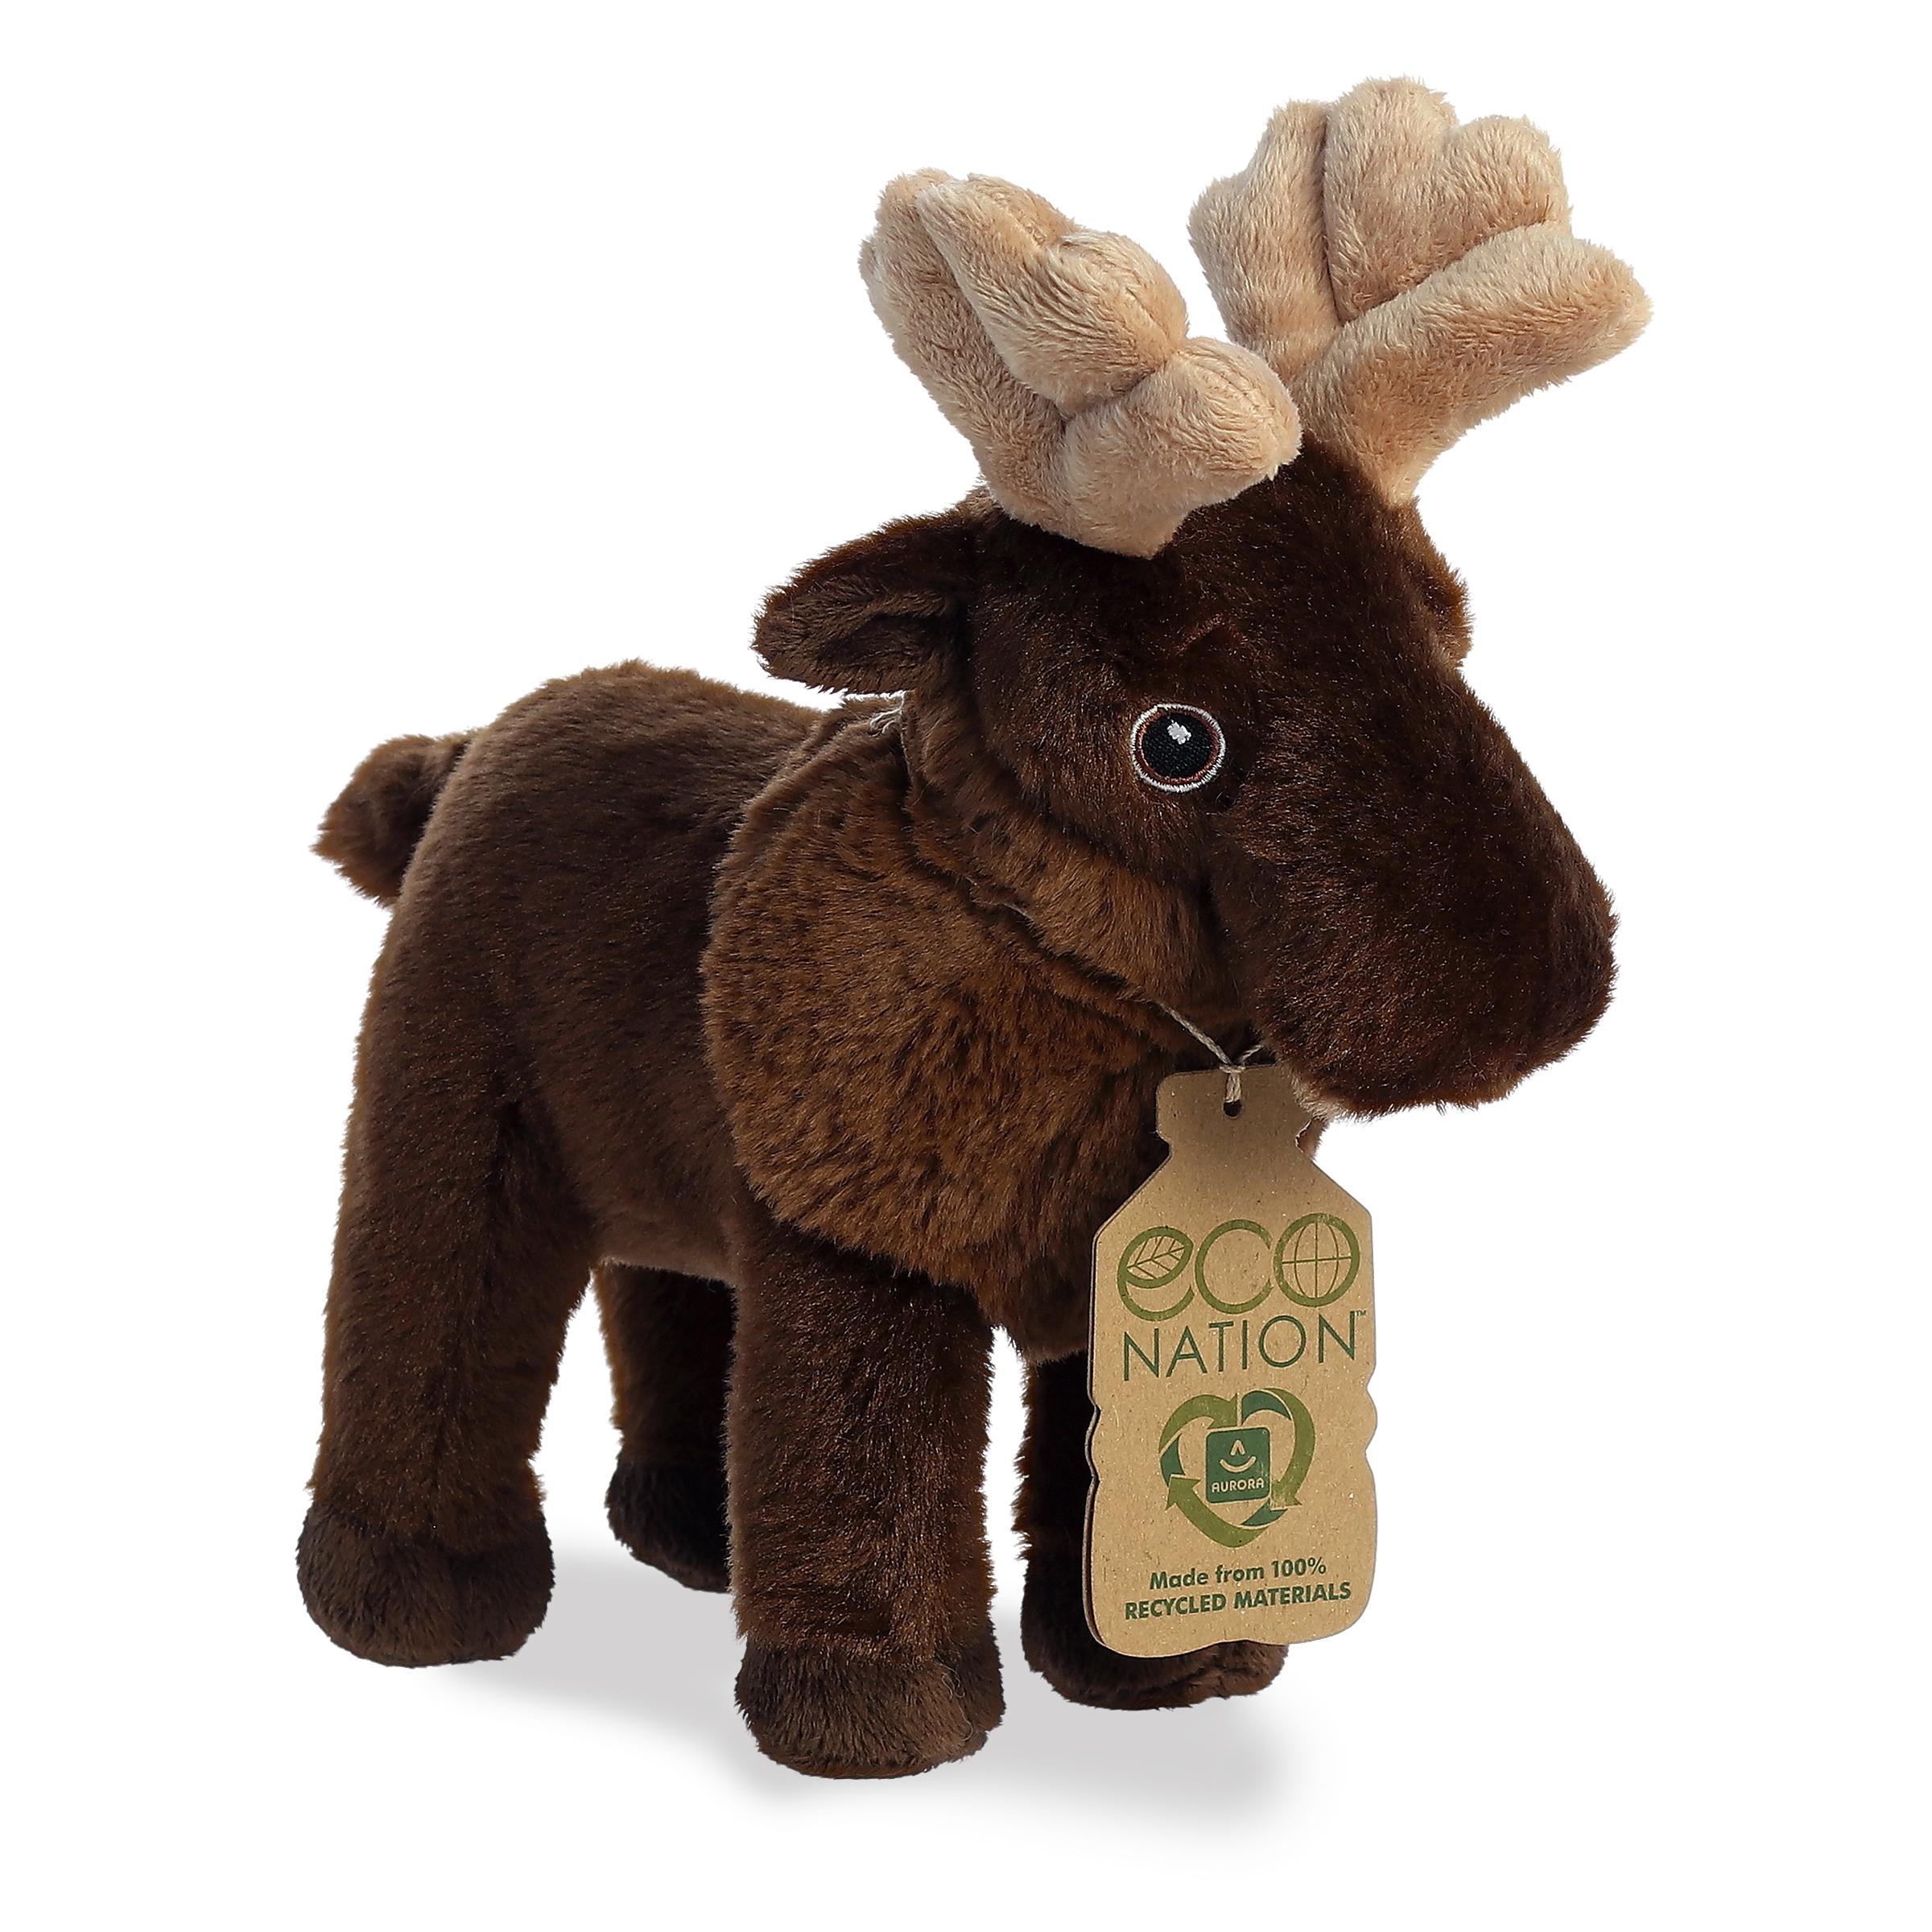 A charming moose plush that has a rich brown coat and soft antlers, embroidered eyes, and an eco-nation tag by its neck